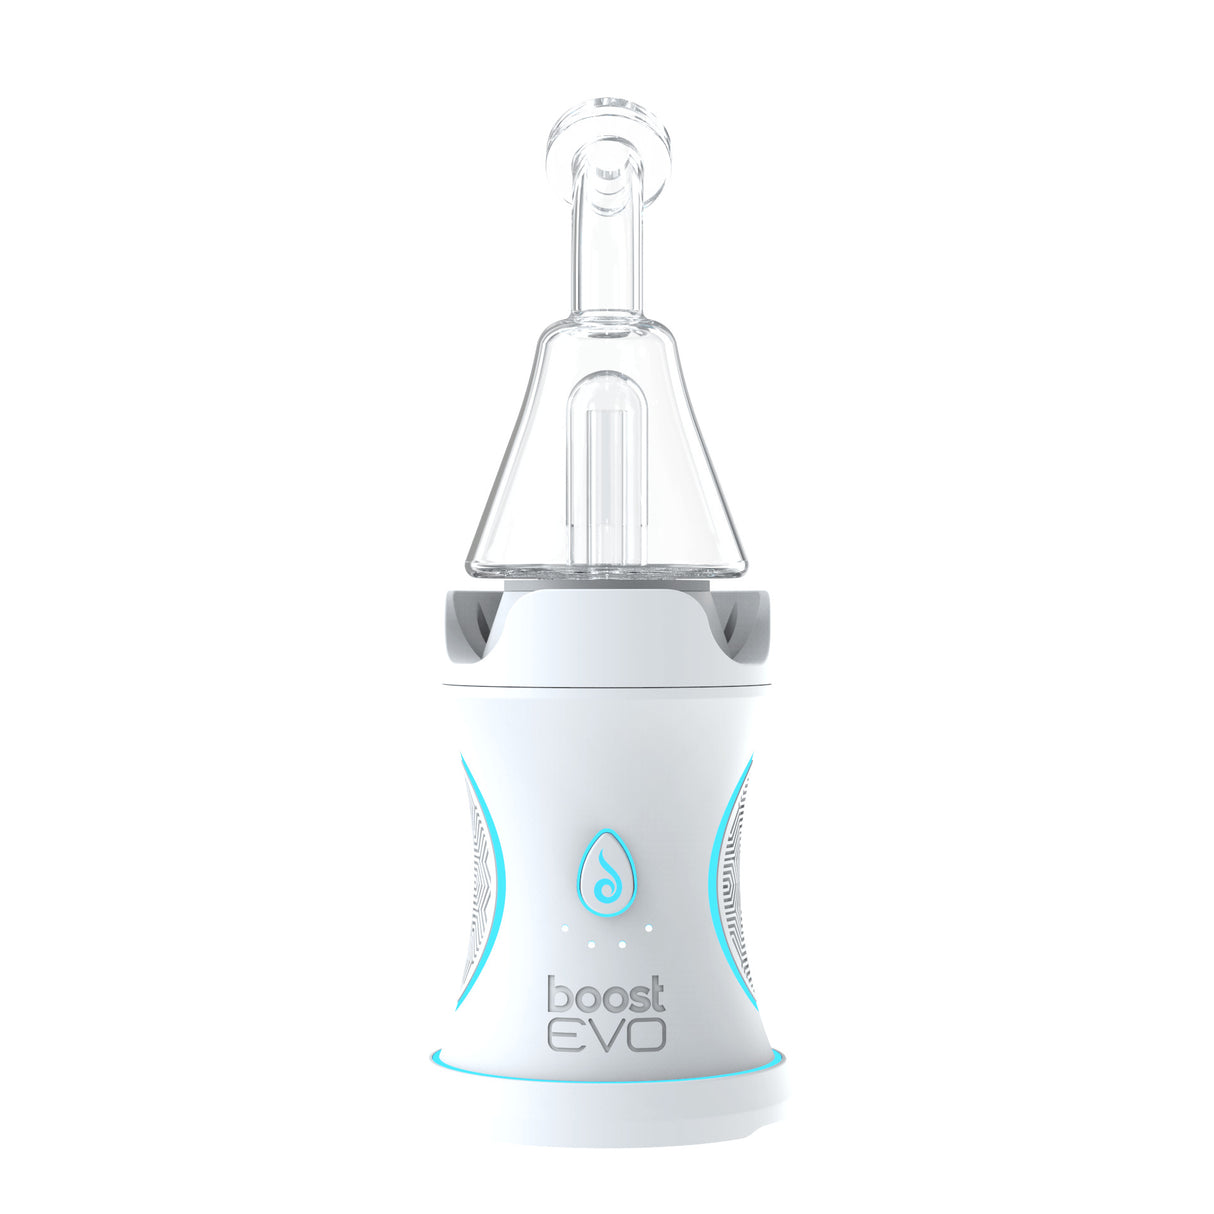 Dr Dabber Boost Evo White Vaporizer with Quartz Attachment, Front View on White Background